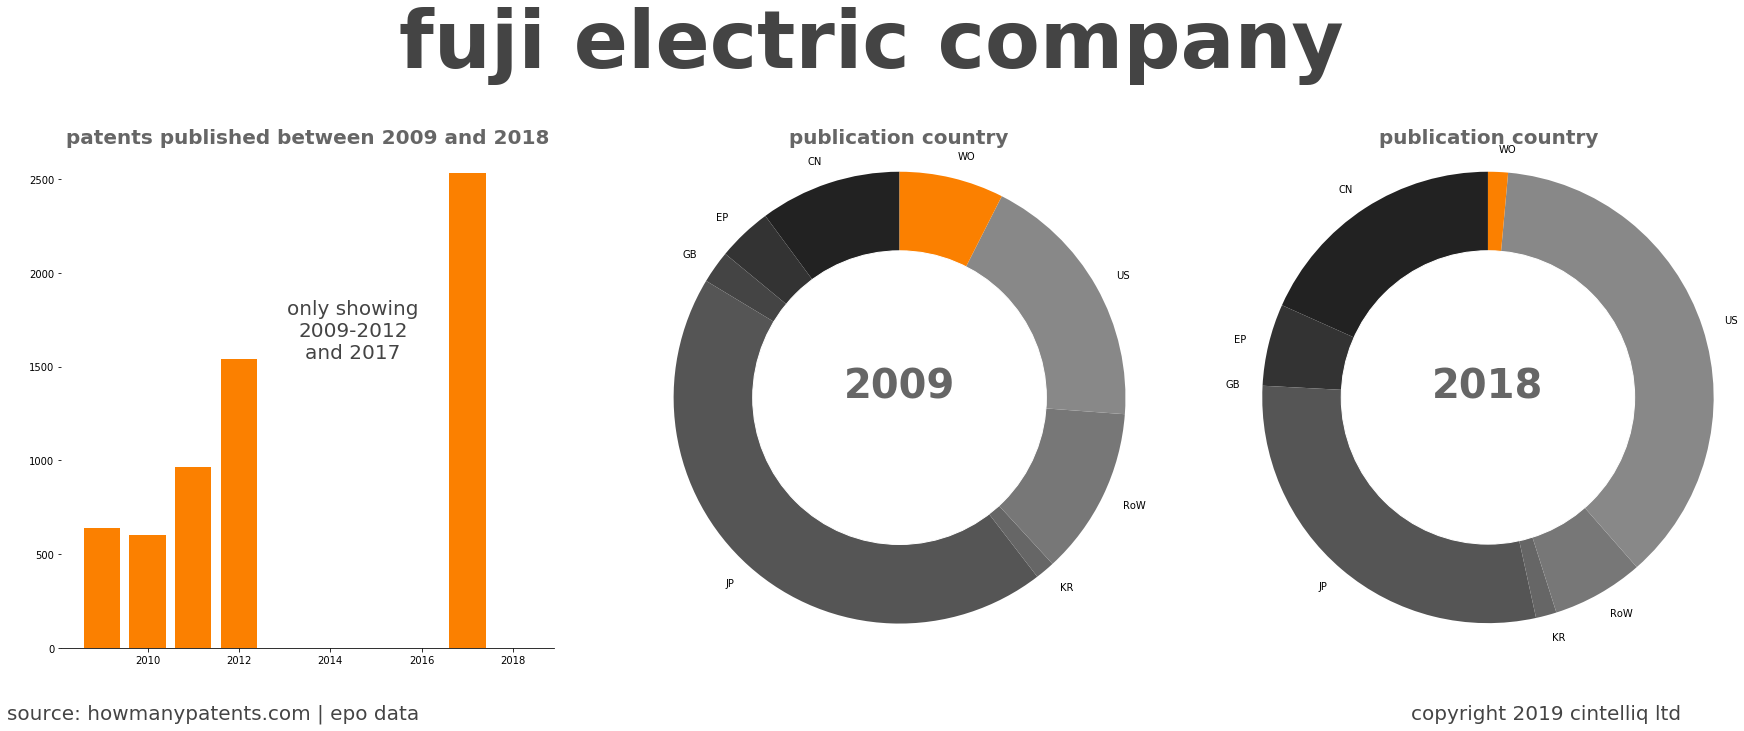 summary of patents for Fuji Electric Company